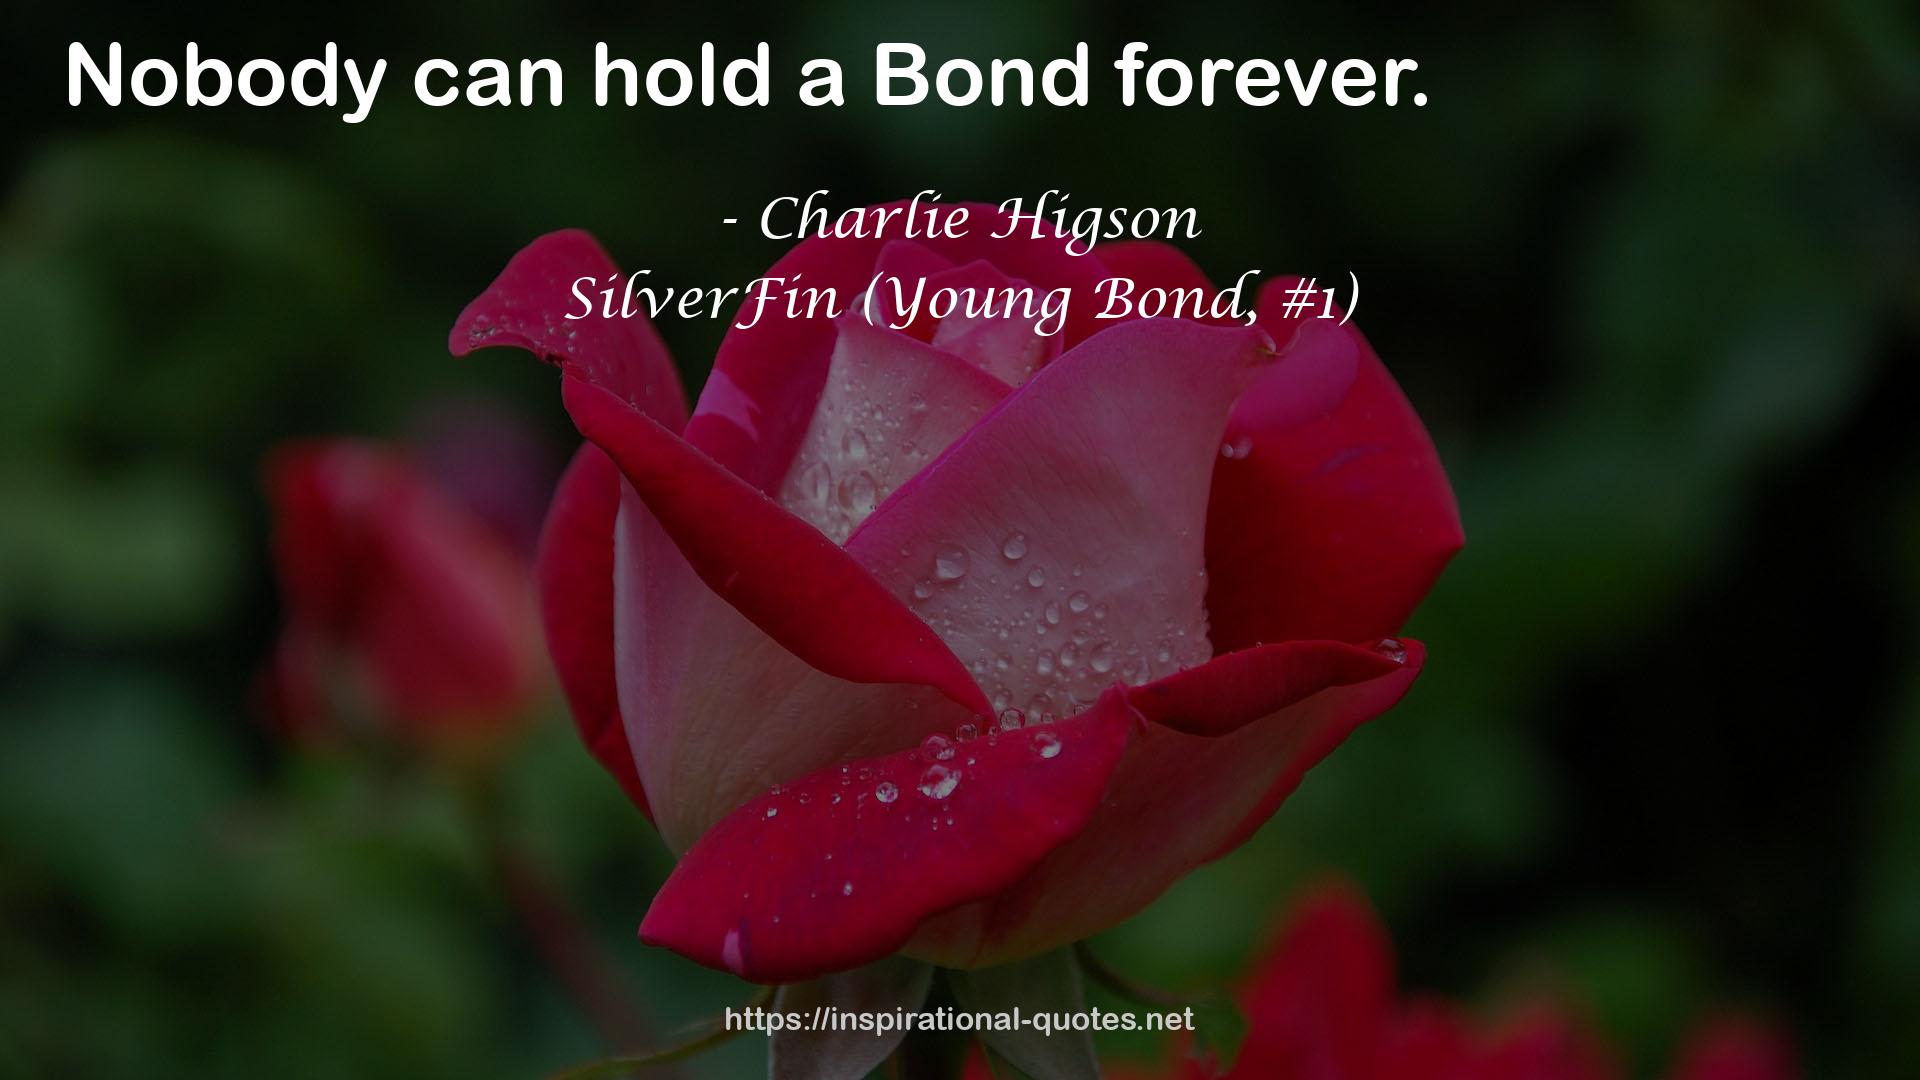 SilverFin (Young Bond, #1) QUOTES